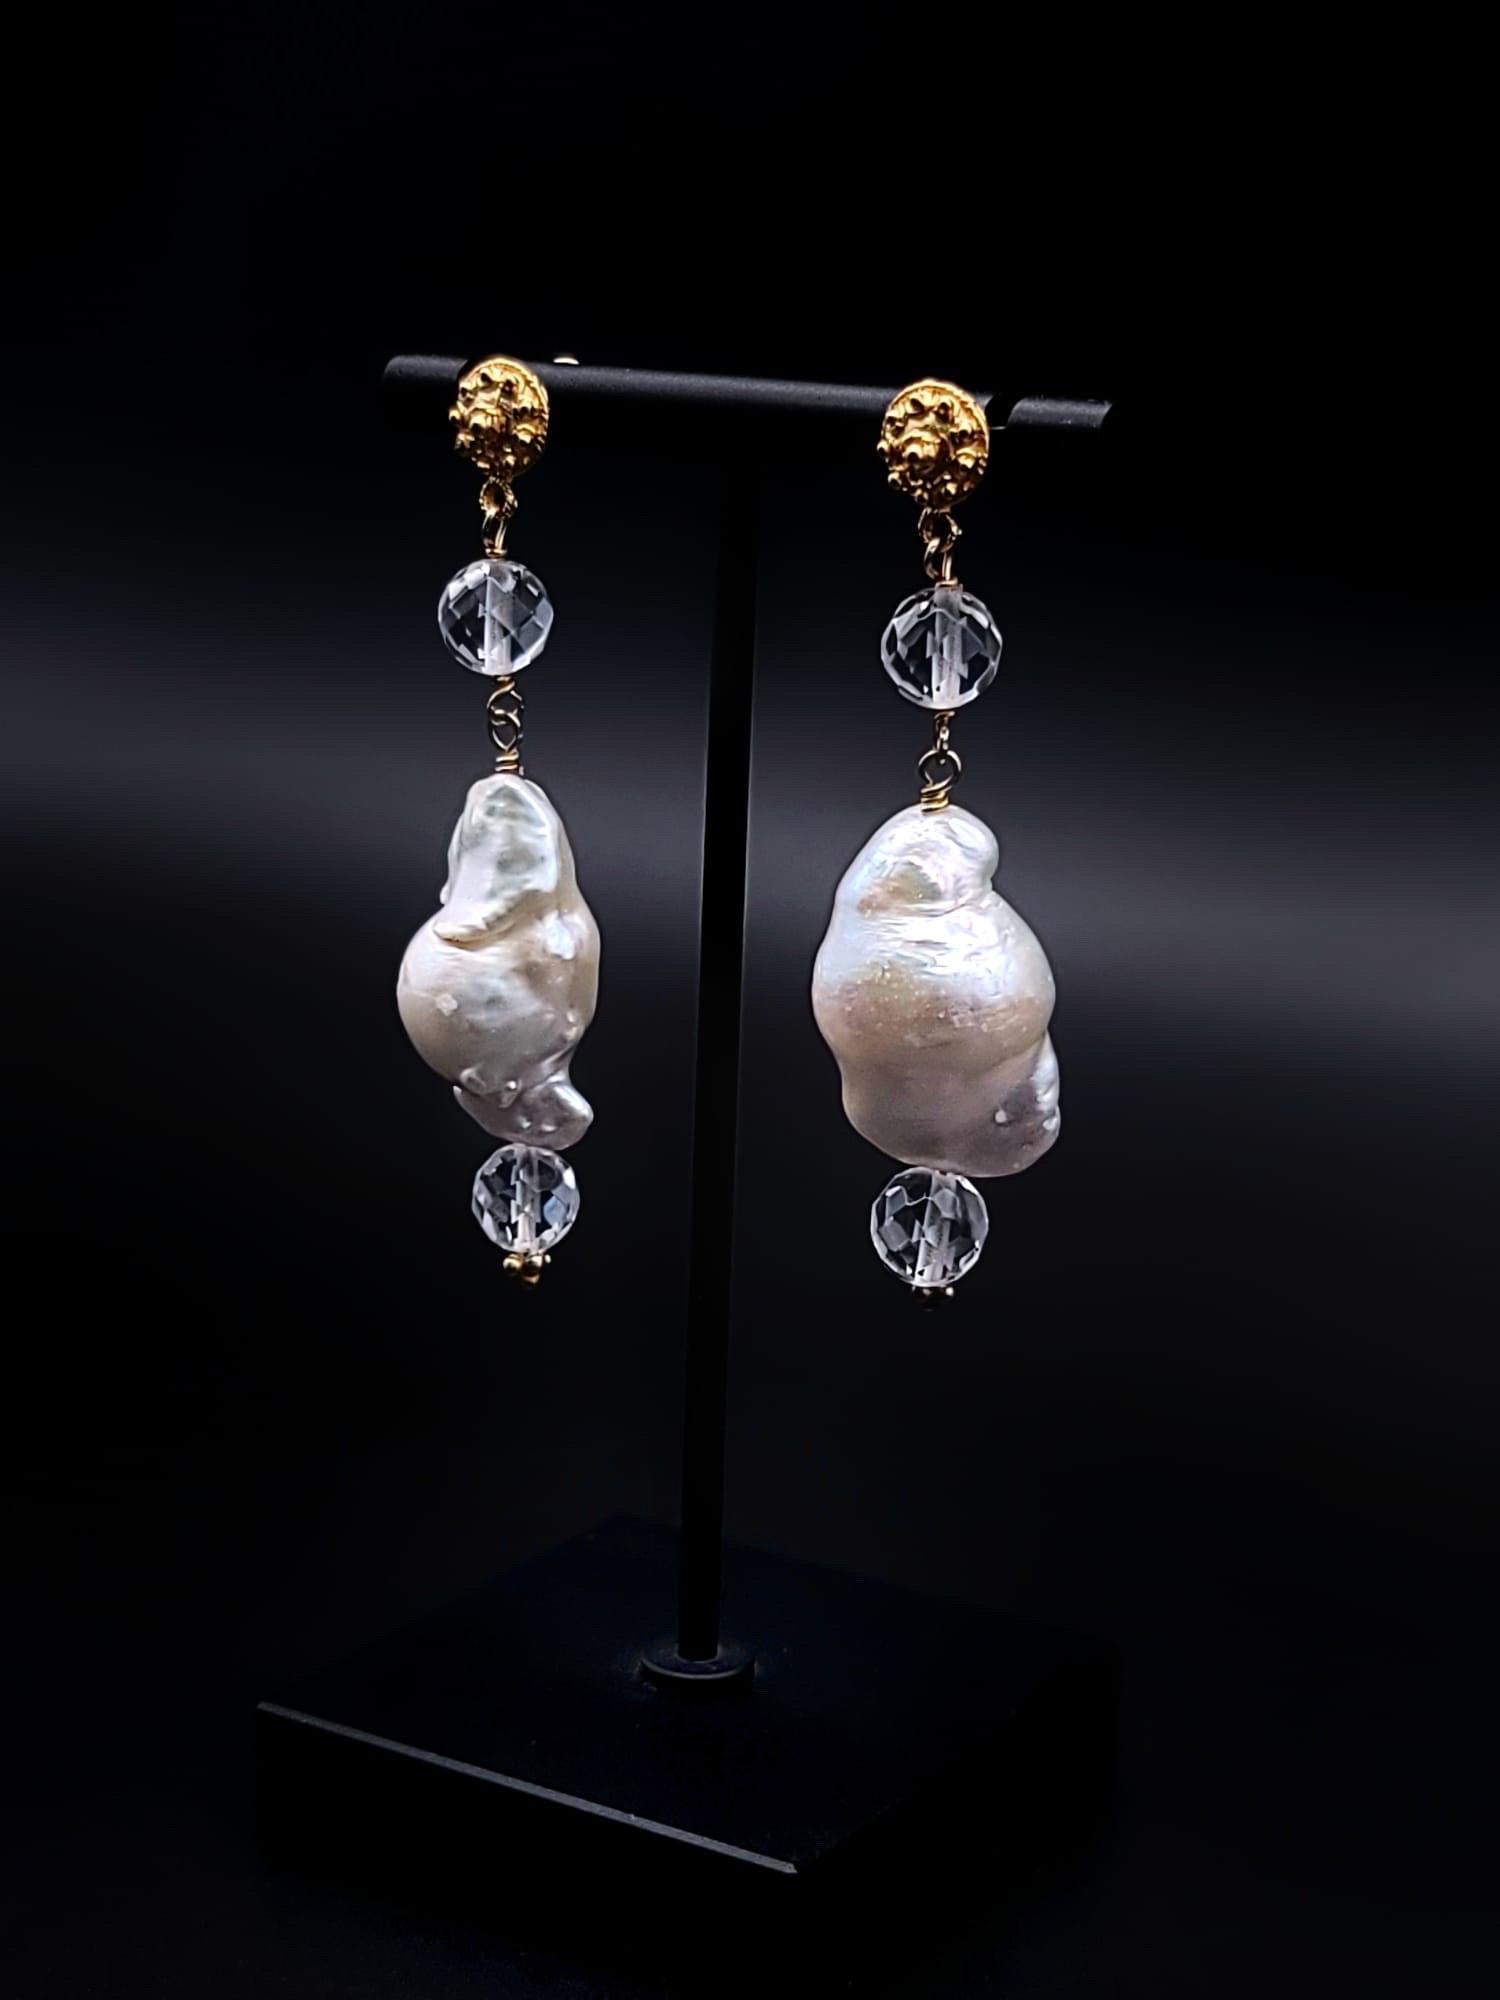 One-of-a-Kind

These stunning Pearl and Crystal drop earrings exude elegance and charm. The pair of large Baroque white lustrous Pearls are suspended from a cut crystal bead, creating a beautiful and graceful silhouette. The handcrafted vermeil